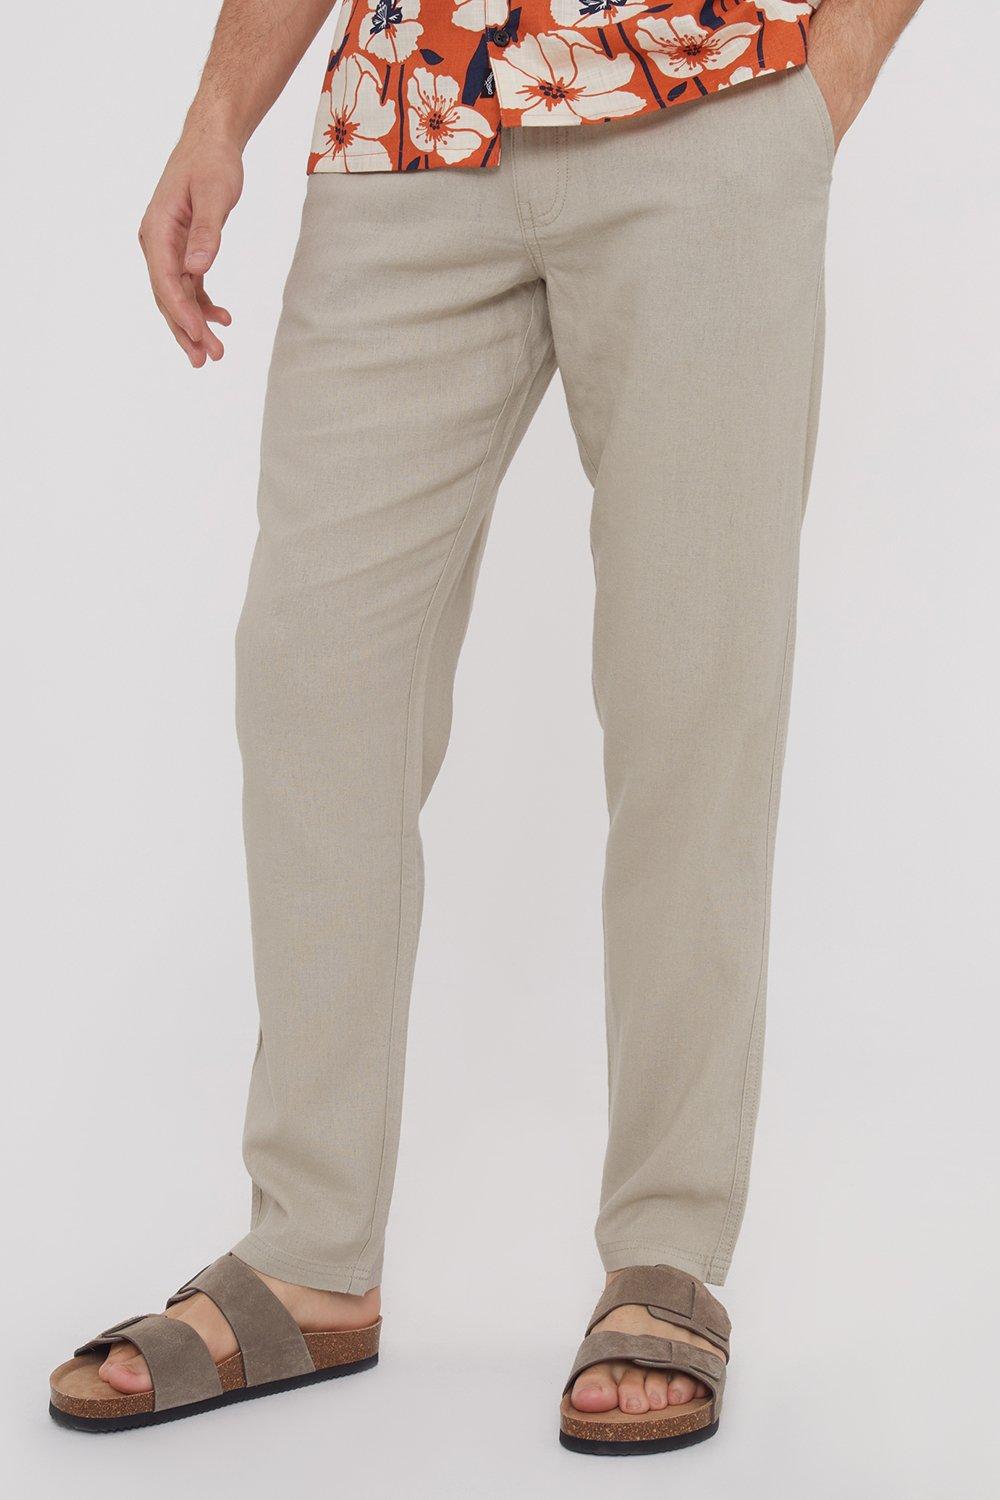 'Annual' Linen Blend Casual Trousers